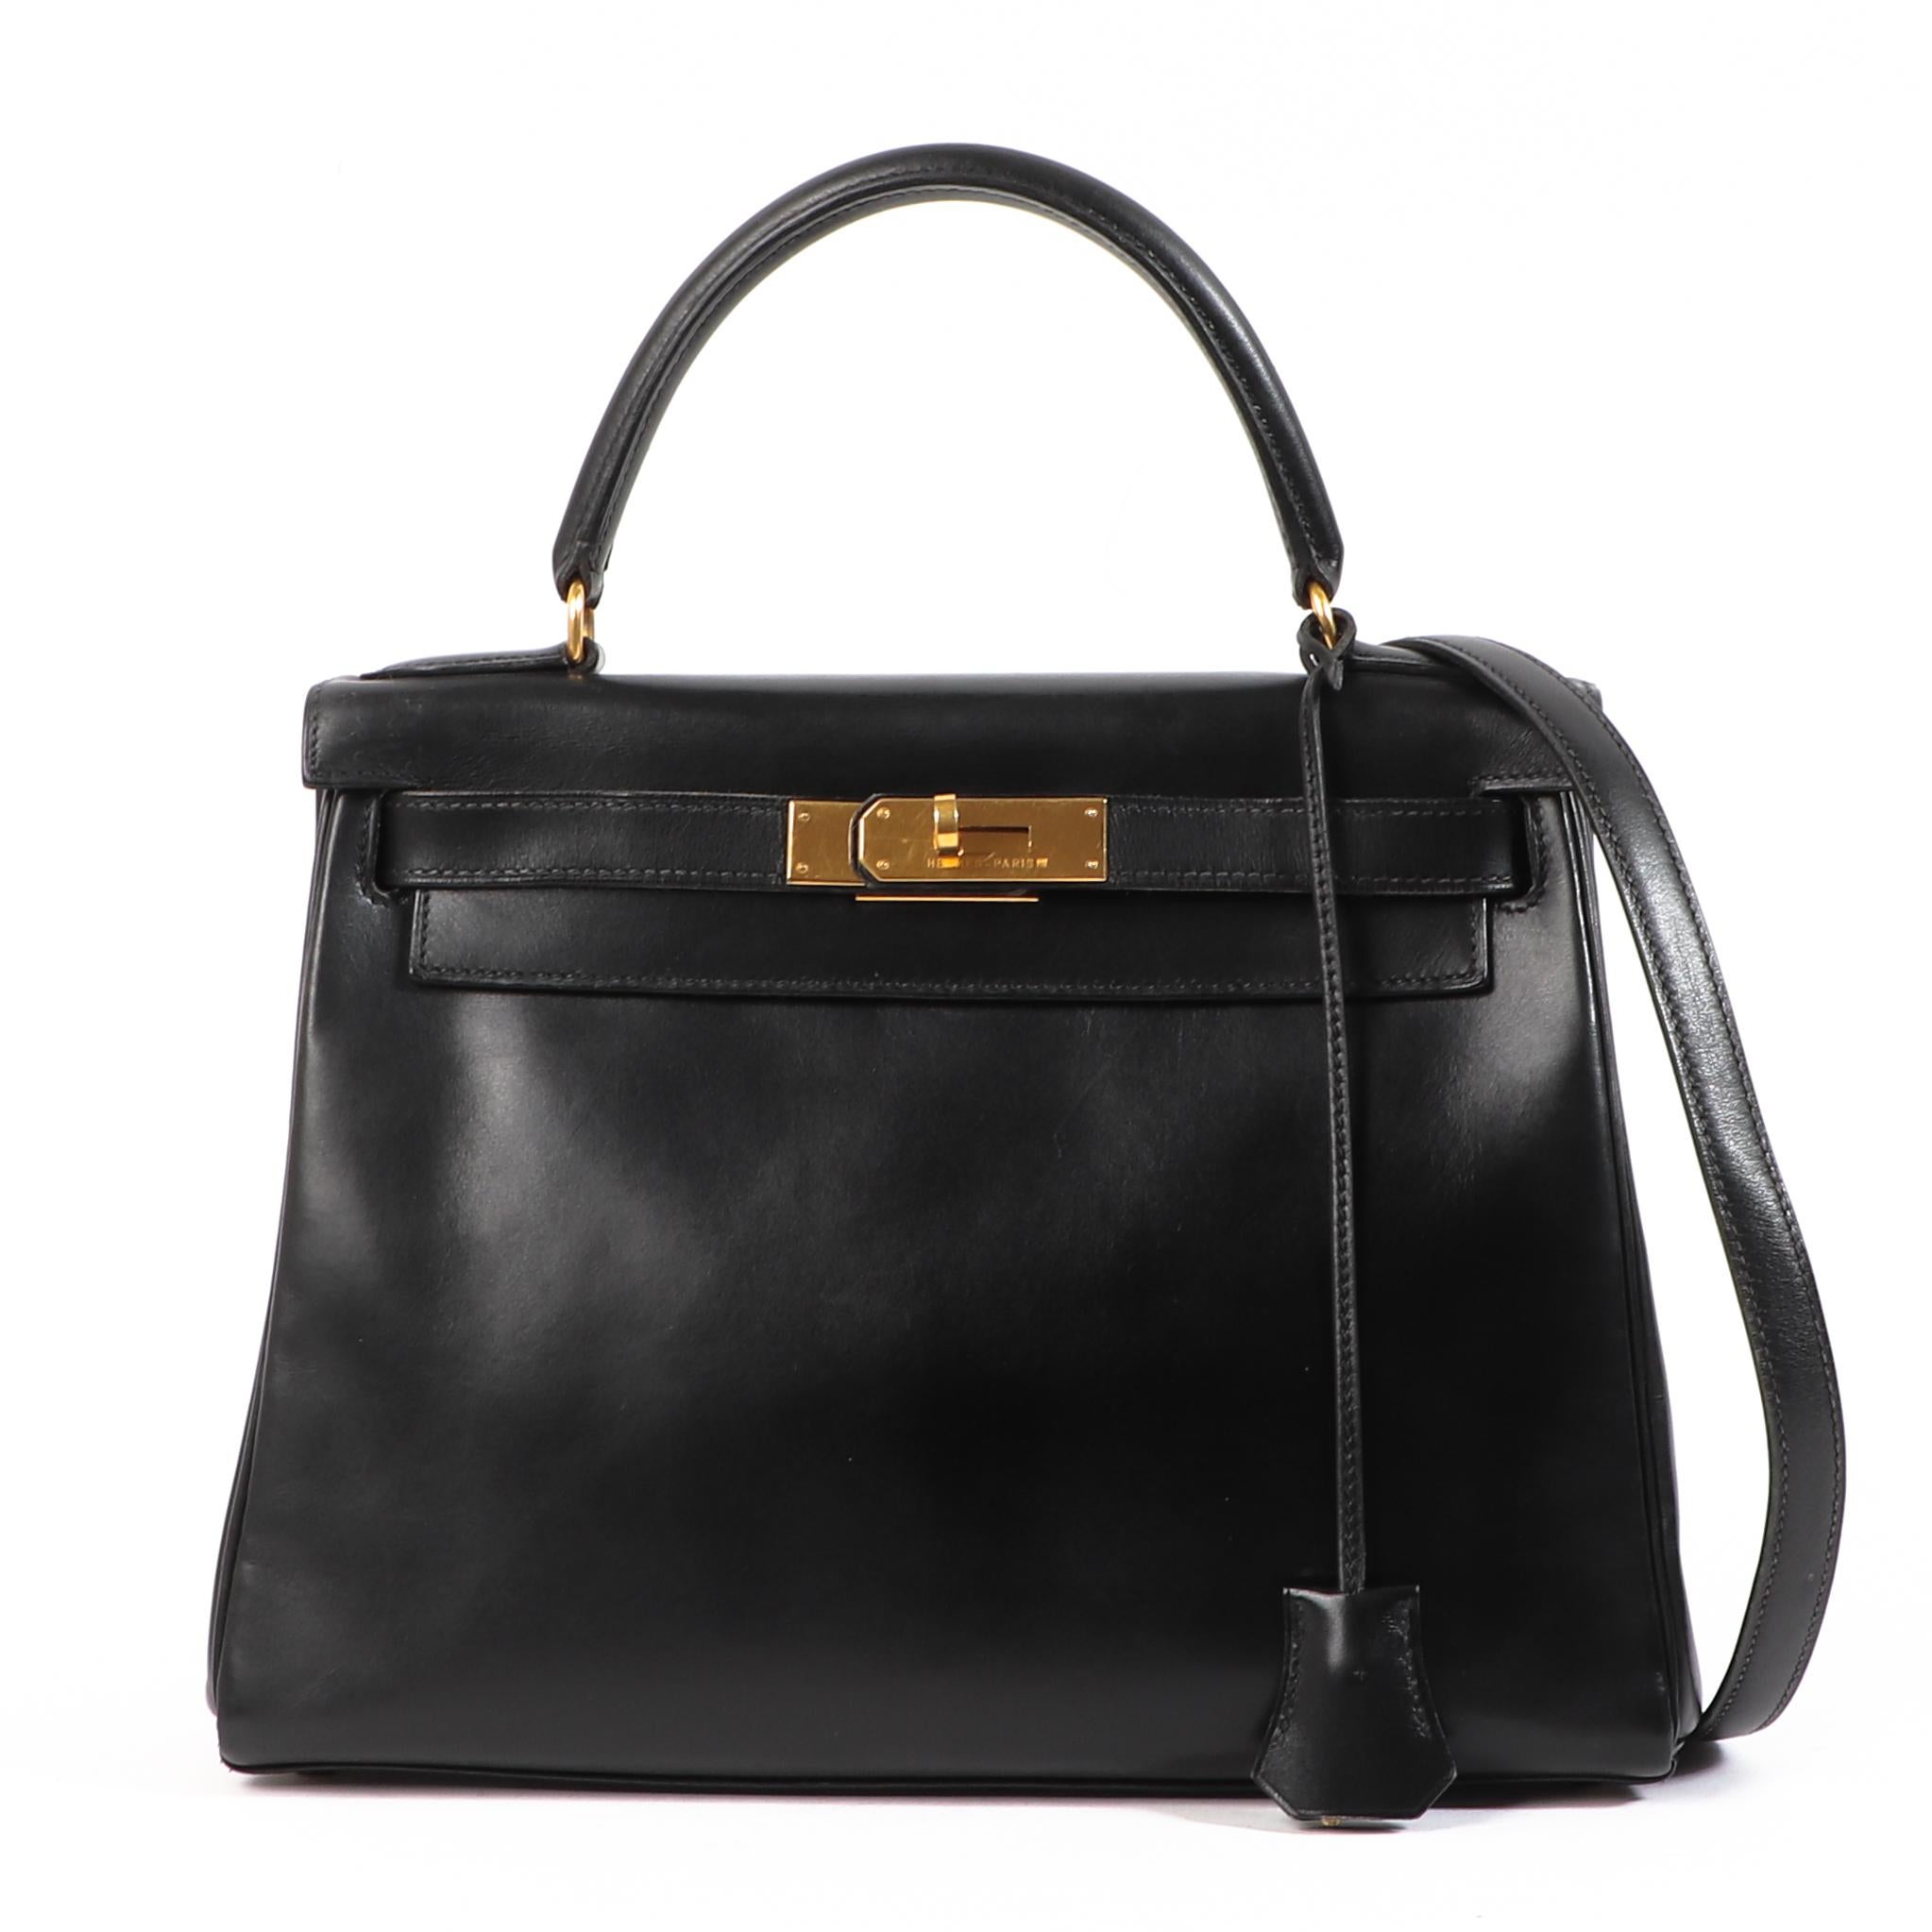 Hermès Vintage Kelly 28 Black Box Gold Hardware

Old but still gold, this Hermès vintage Kelly 28 has been exceptionally crafted from Box calfskin leather.

The shiny, polished Box leather is one of the most popular leather kinds on Hermès bags.